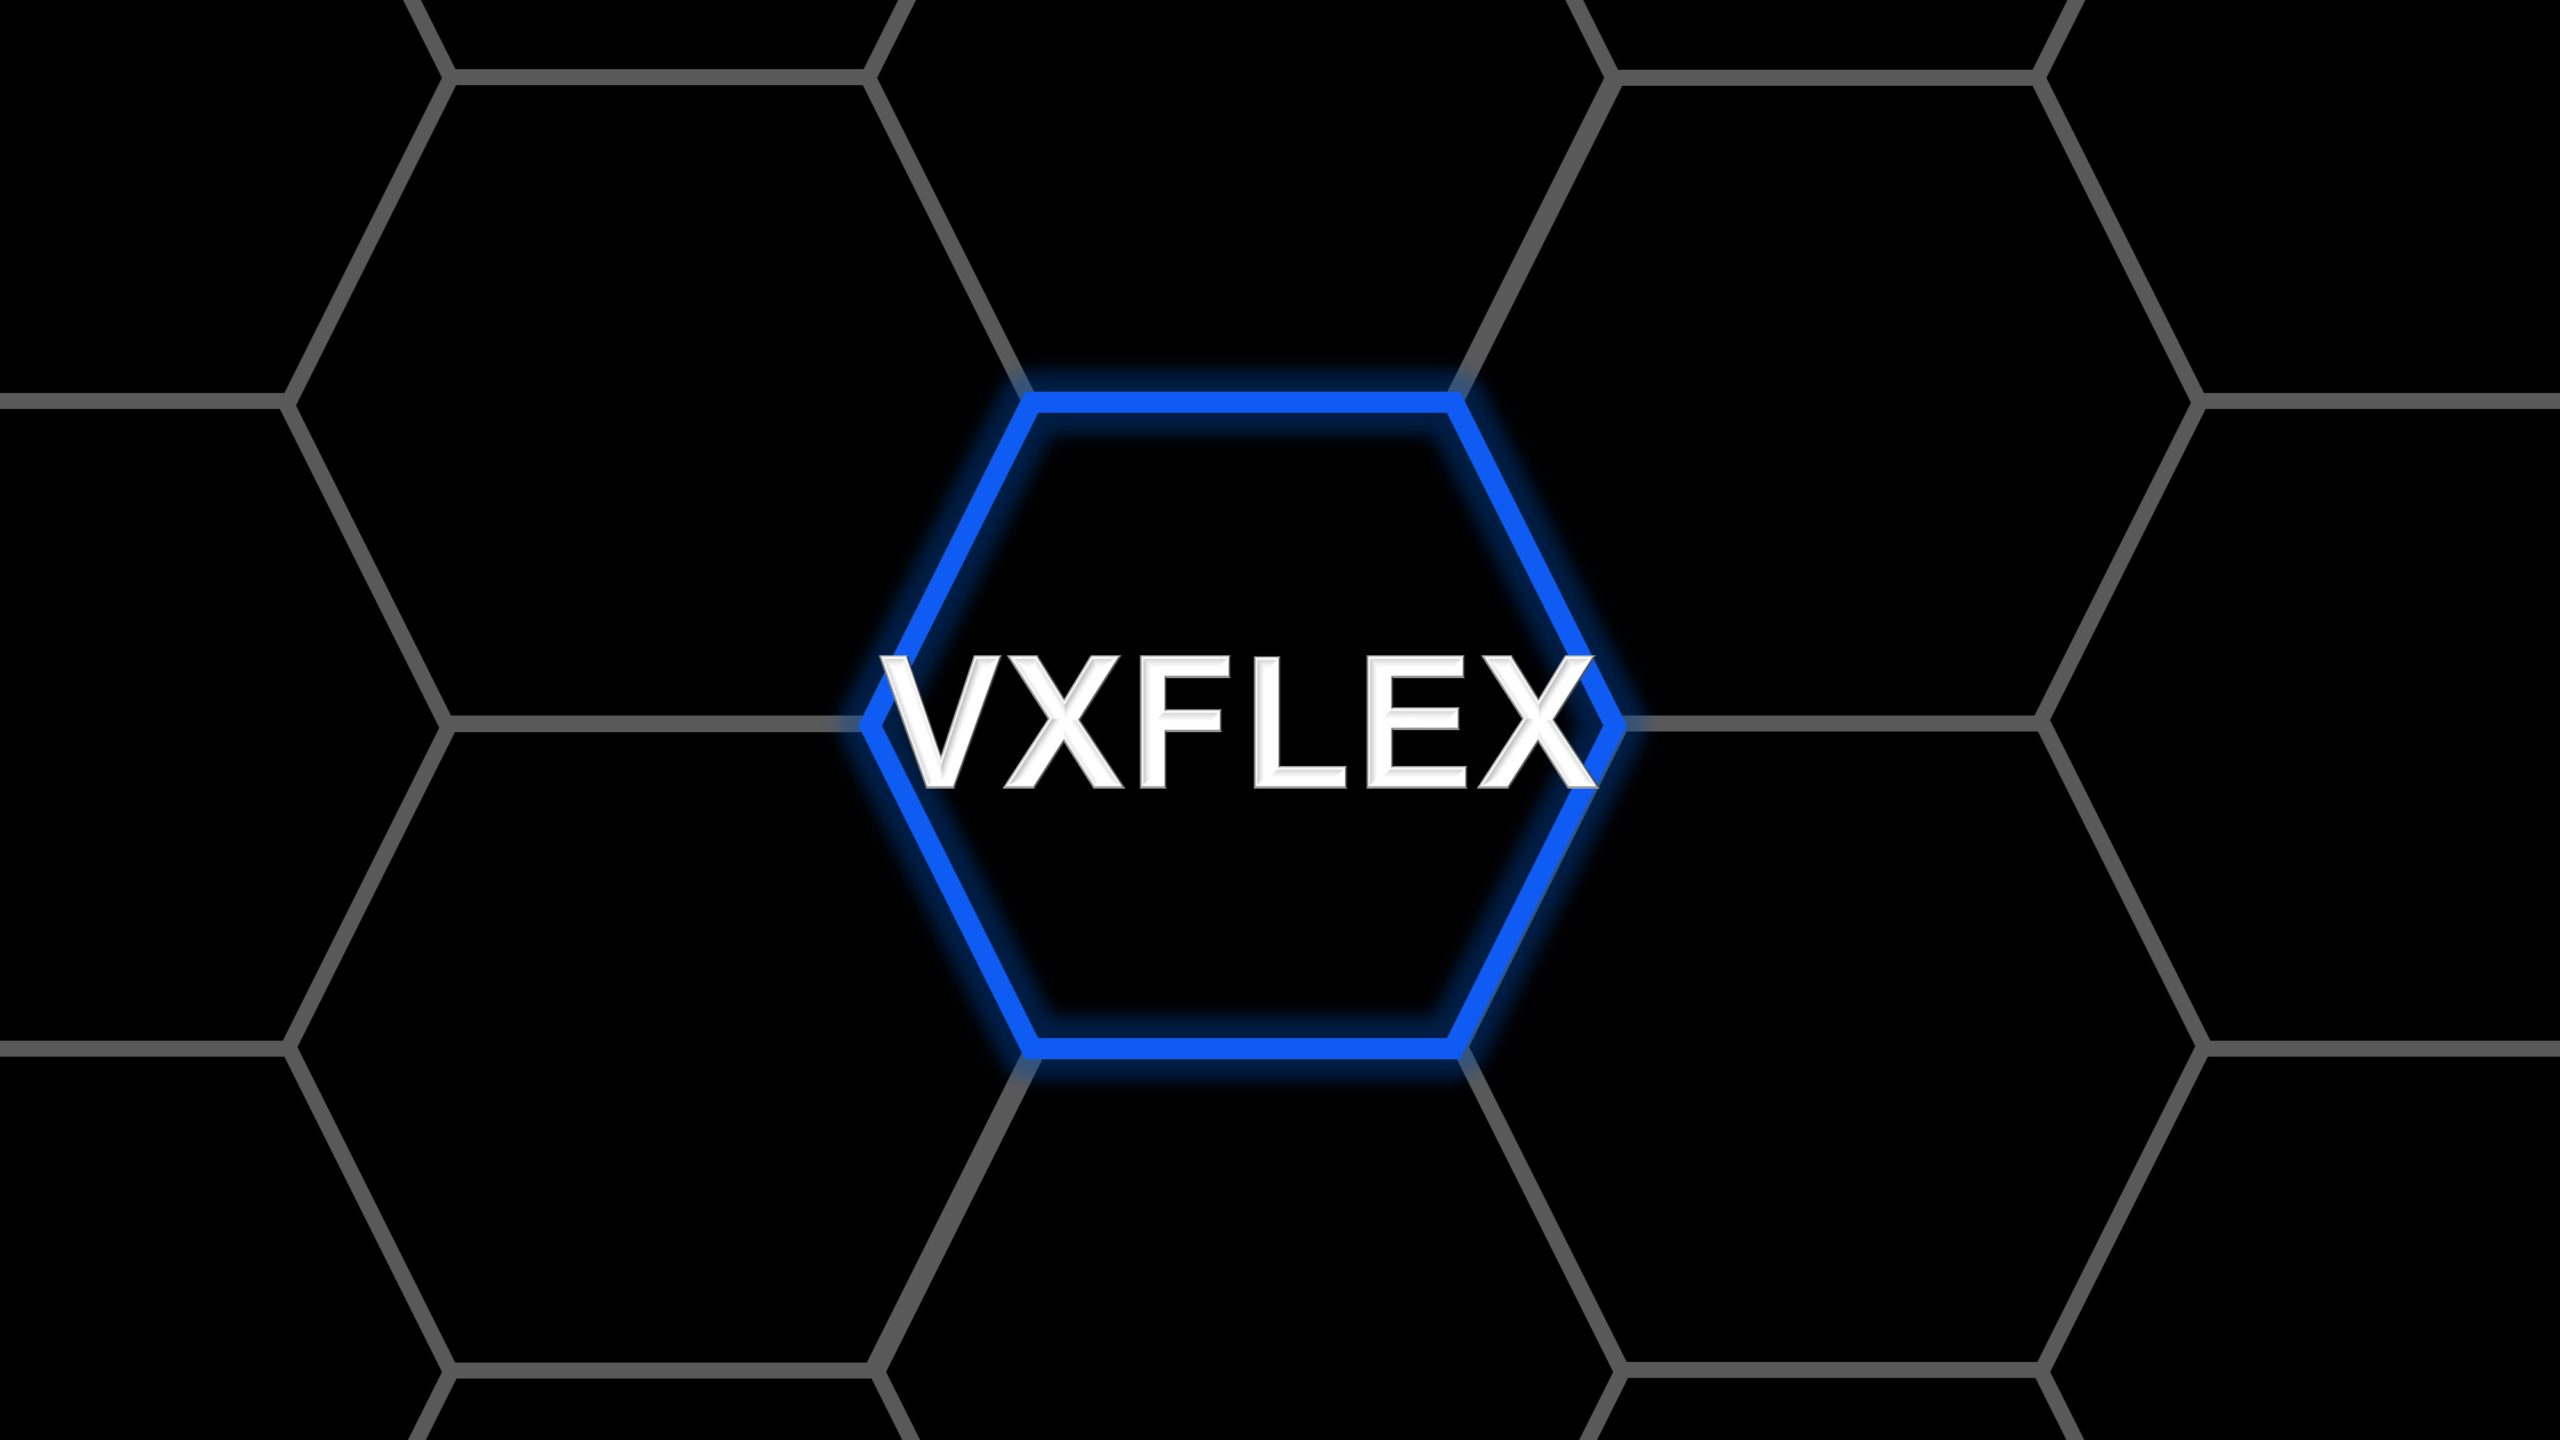 What’s been happening in the world of VxFlex 2019?